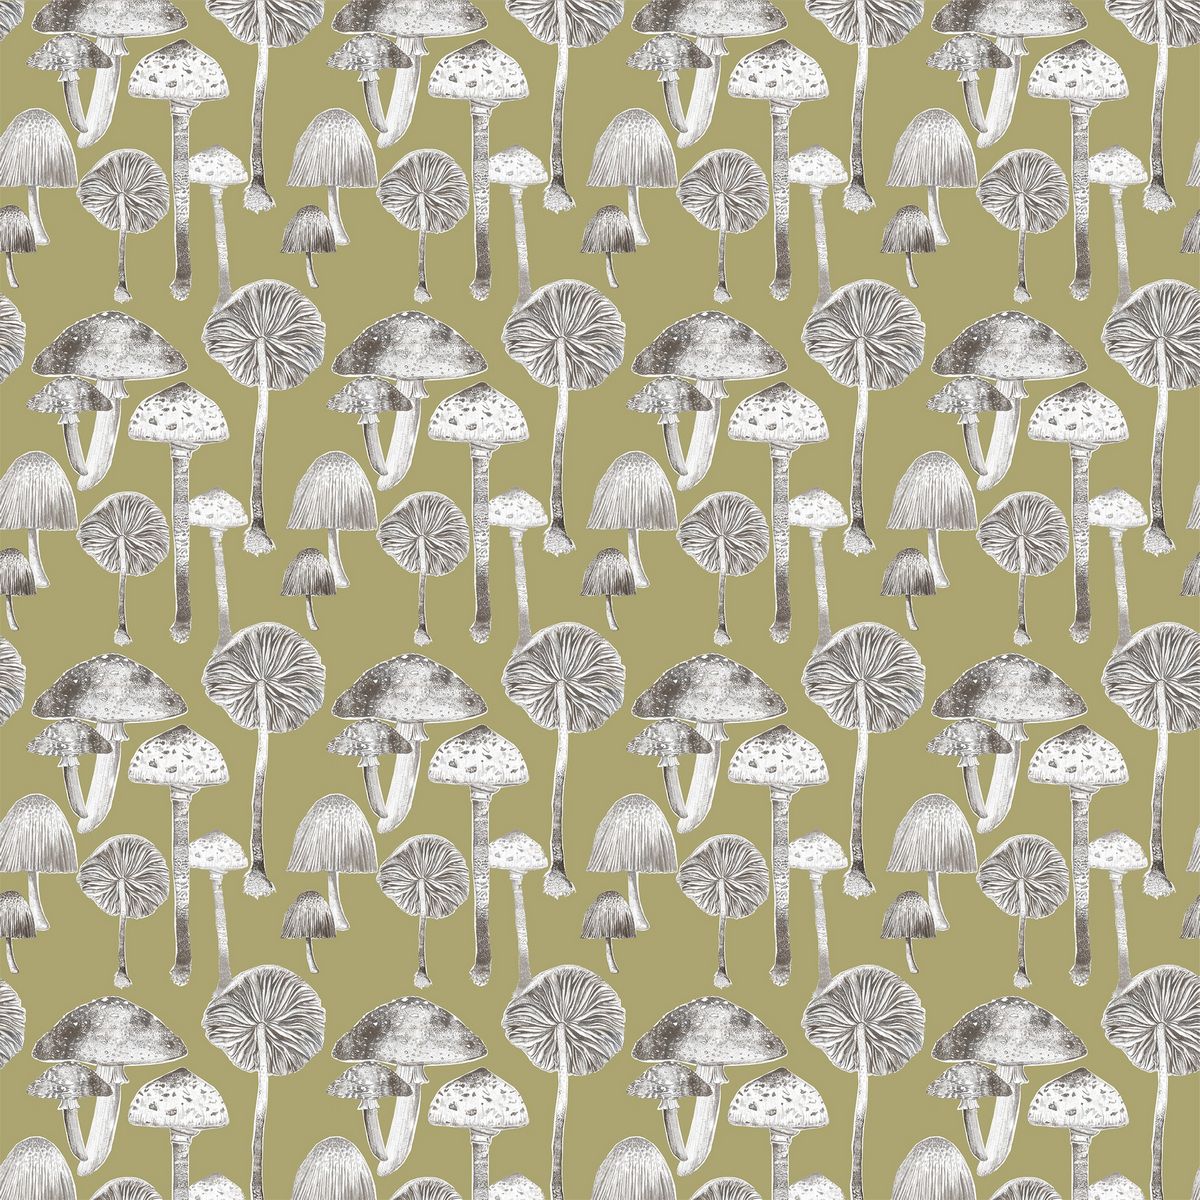 Toadstools Meadow Fabric by Voyage Maison